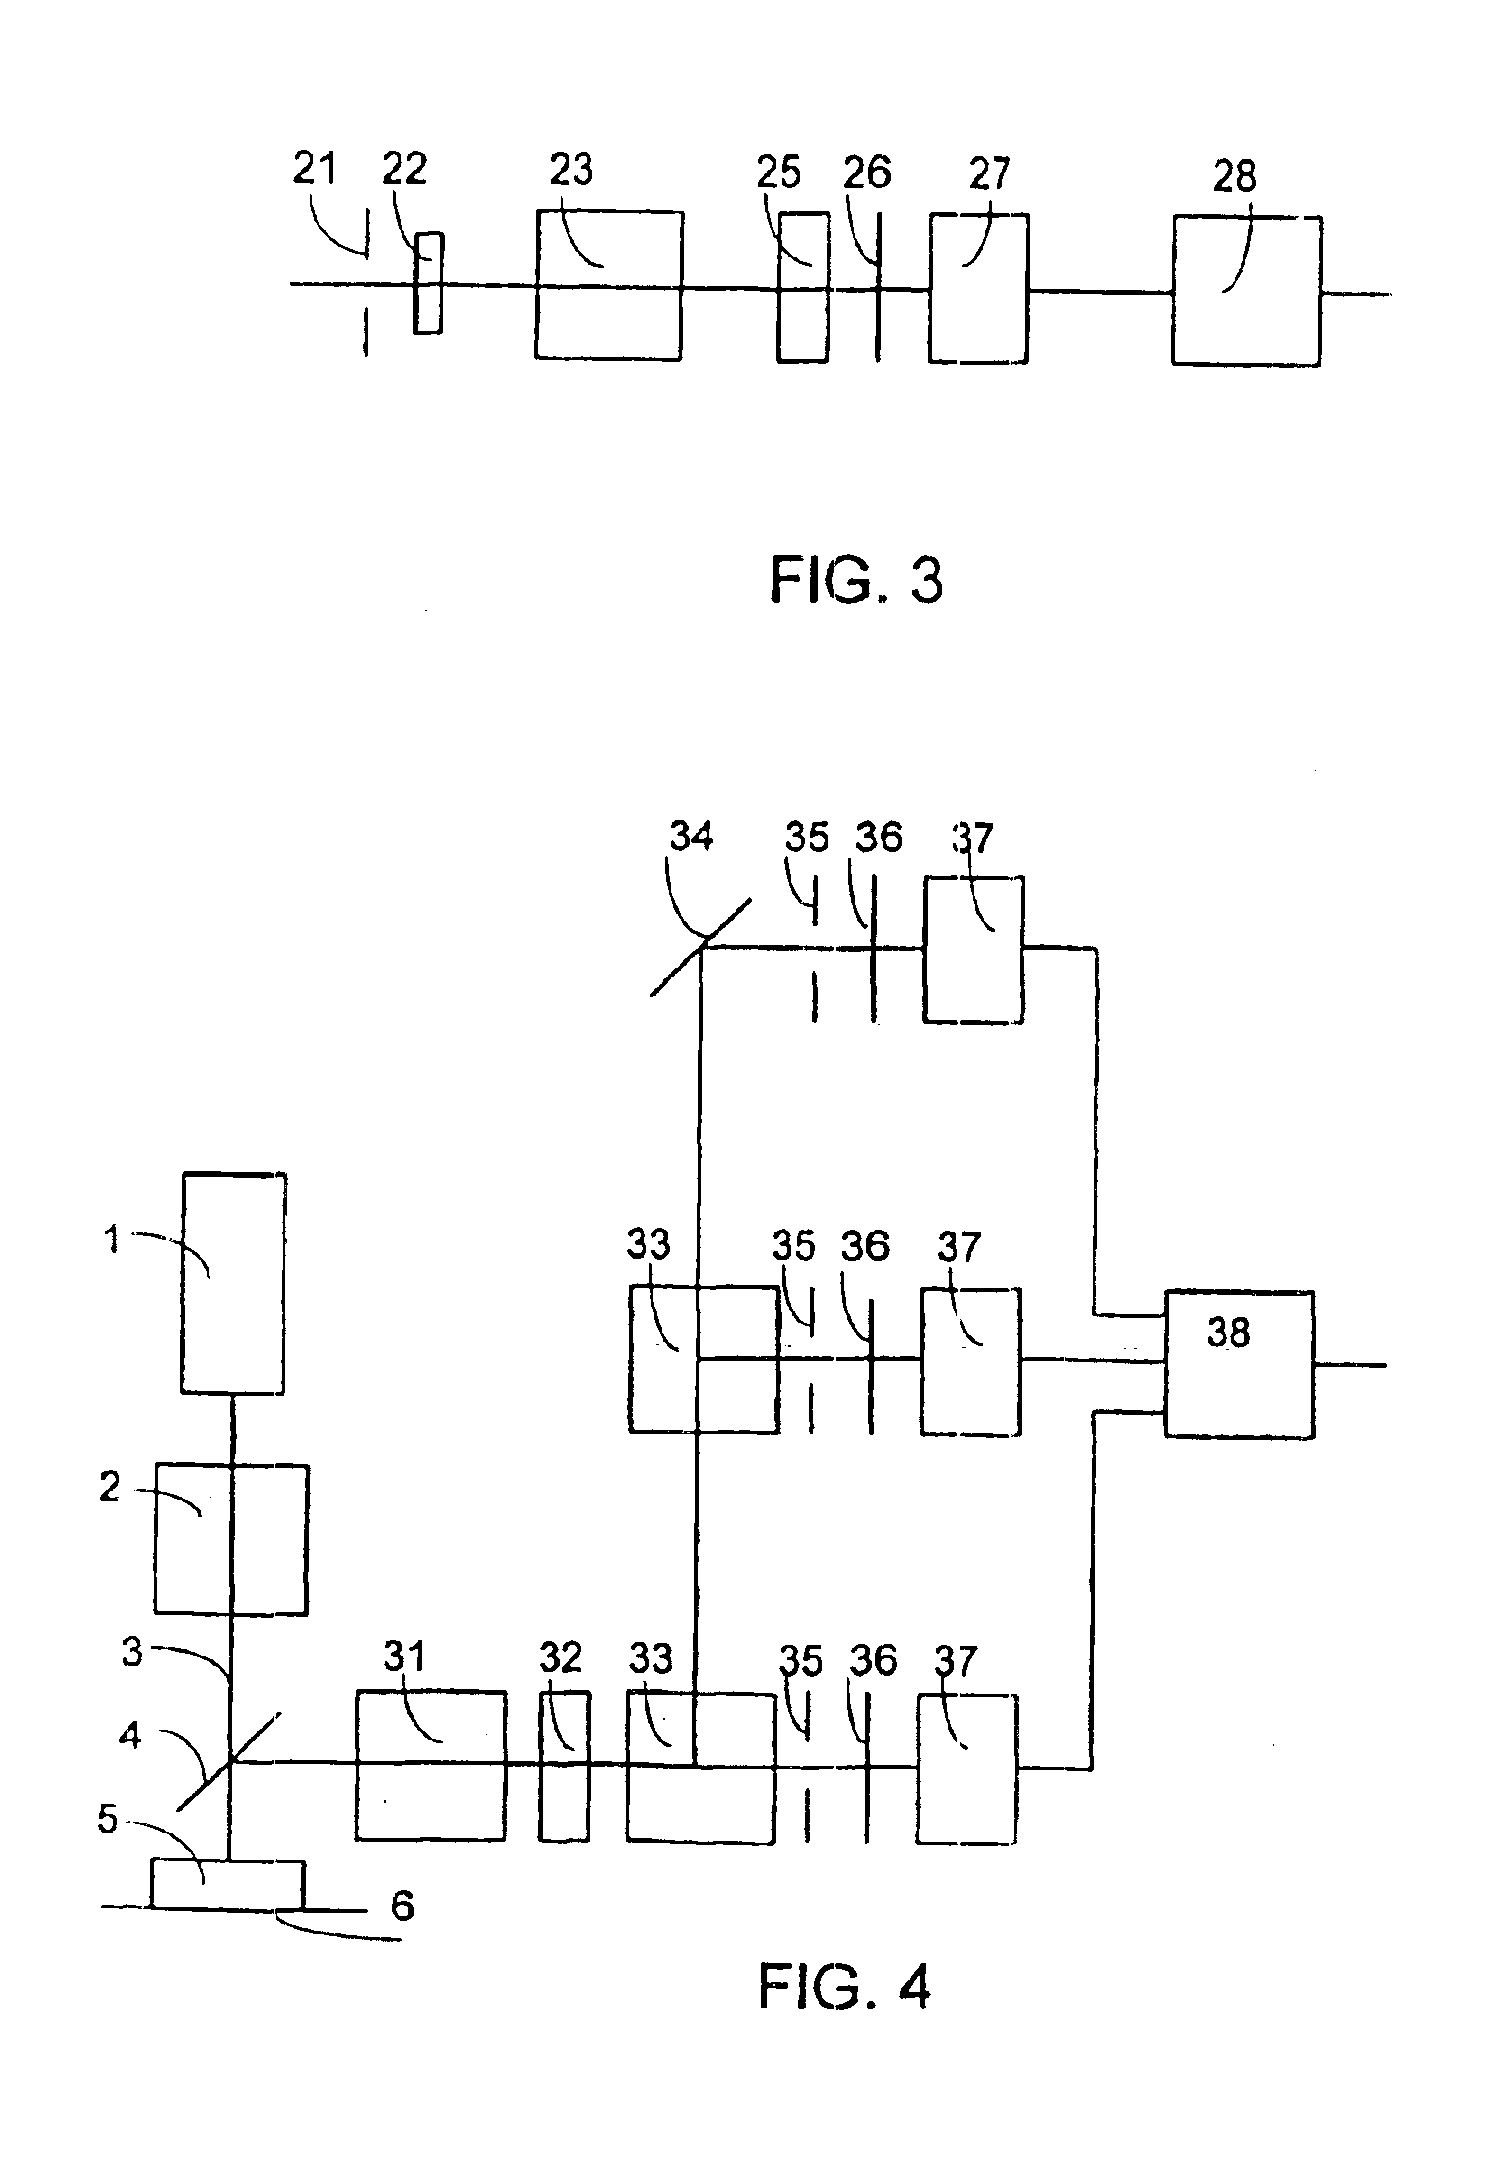 Method and apparatus for determining the polarization properties of light emitted, reflected or transmitted by a material using a laser scanning microscope